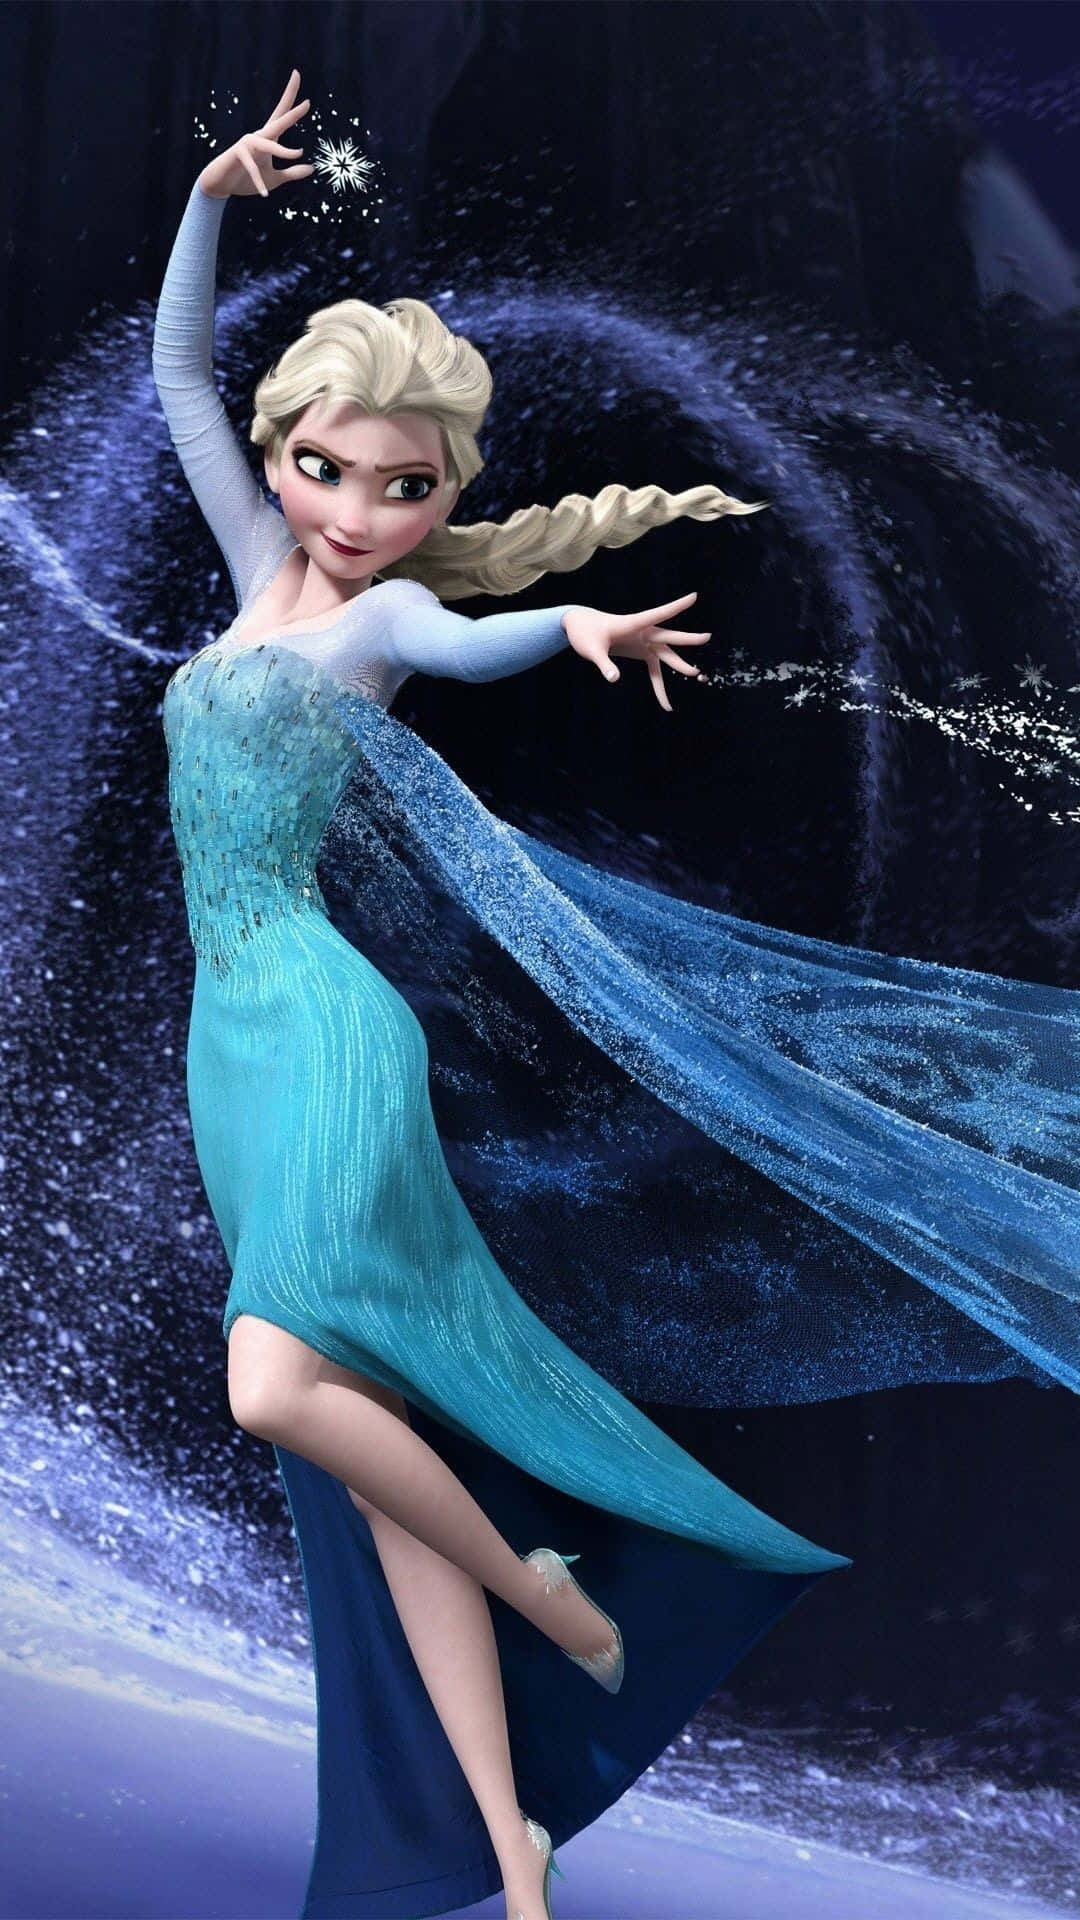 "Stay Organized with Elsa Phone" Wallpaper